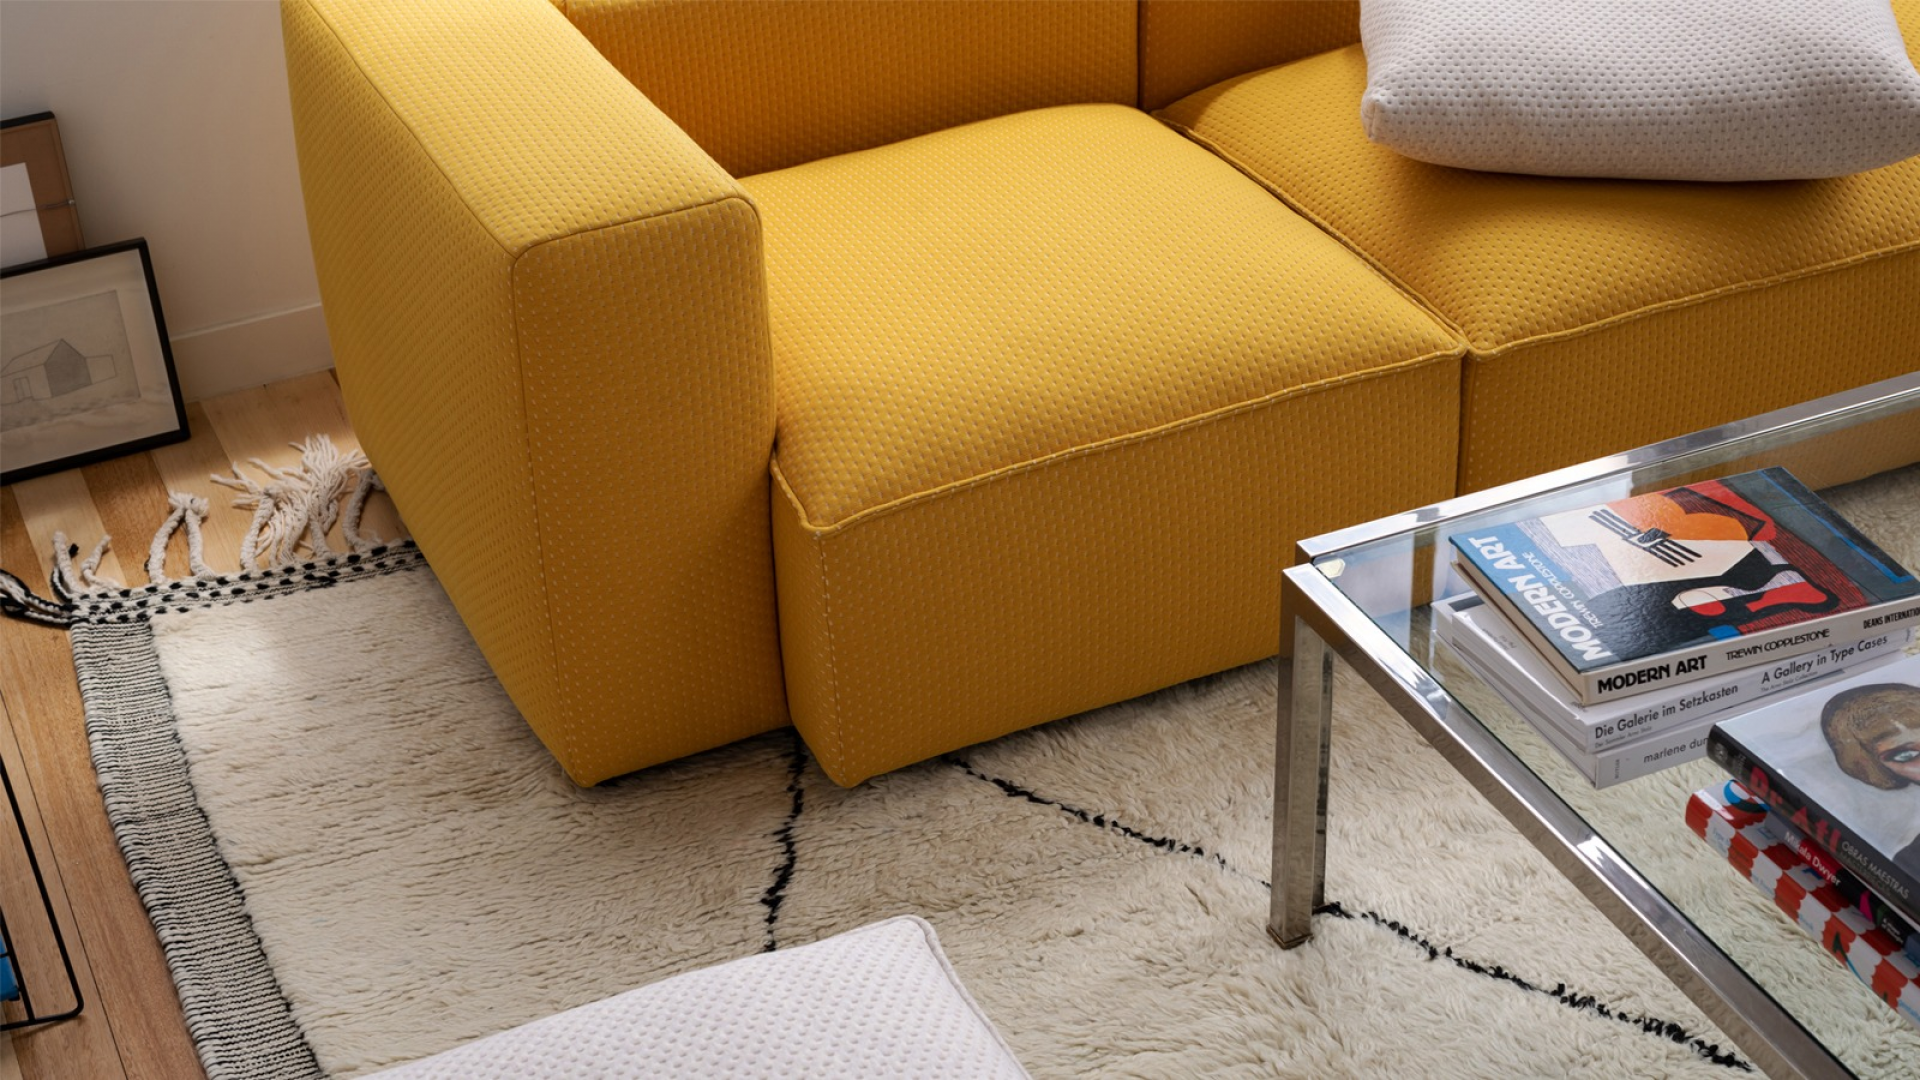 Photo taken from above of a boxy yellow sofa on a shaggy natural wool rug, situated in a living room style space with a coffee table with art books.